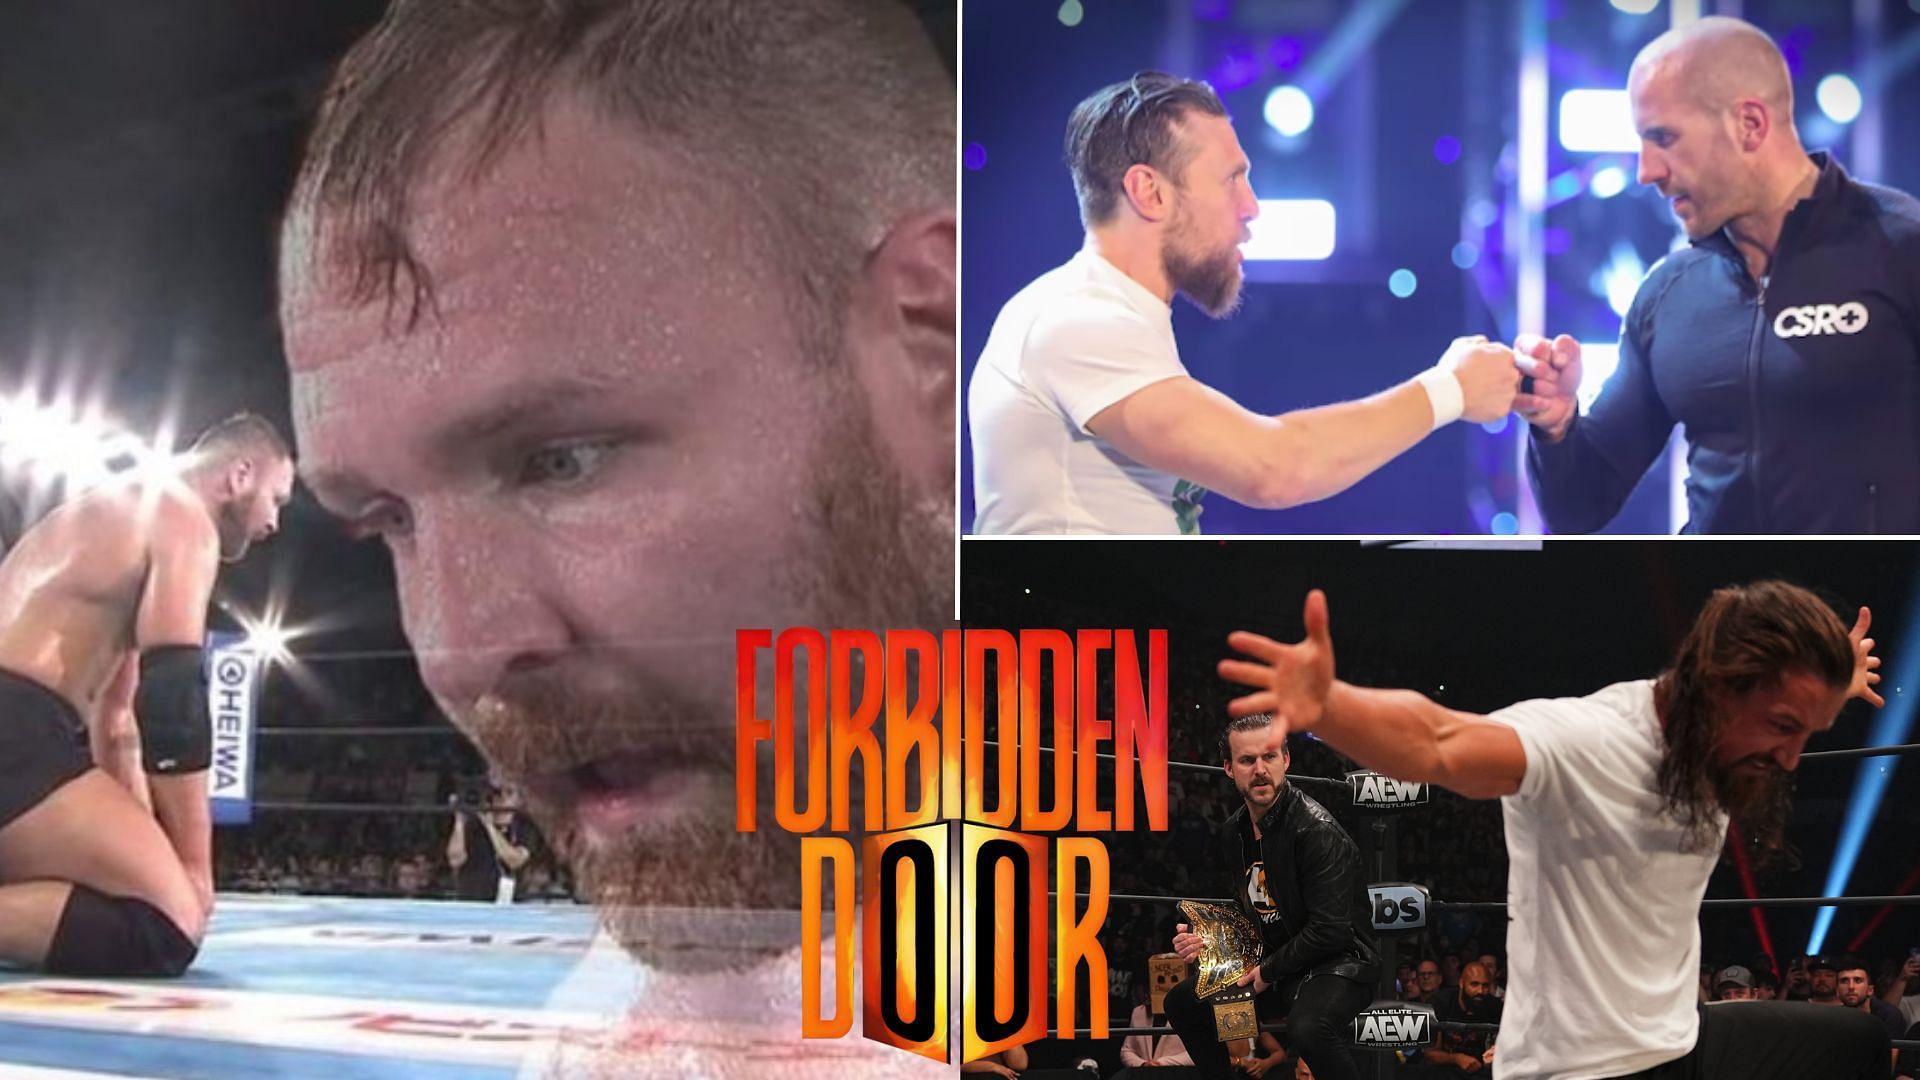 AEW and NJPW come together for their Forbidden Door event